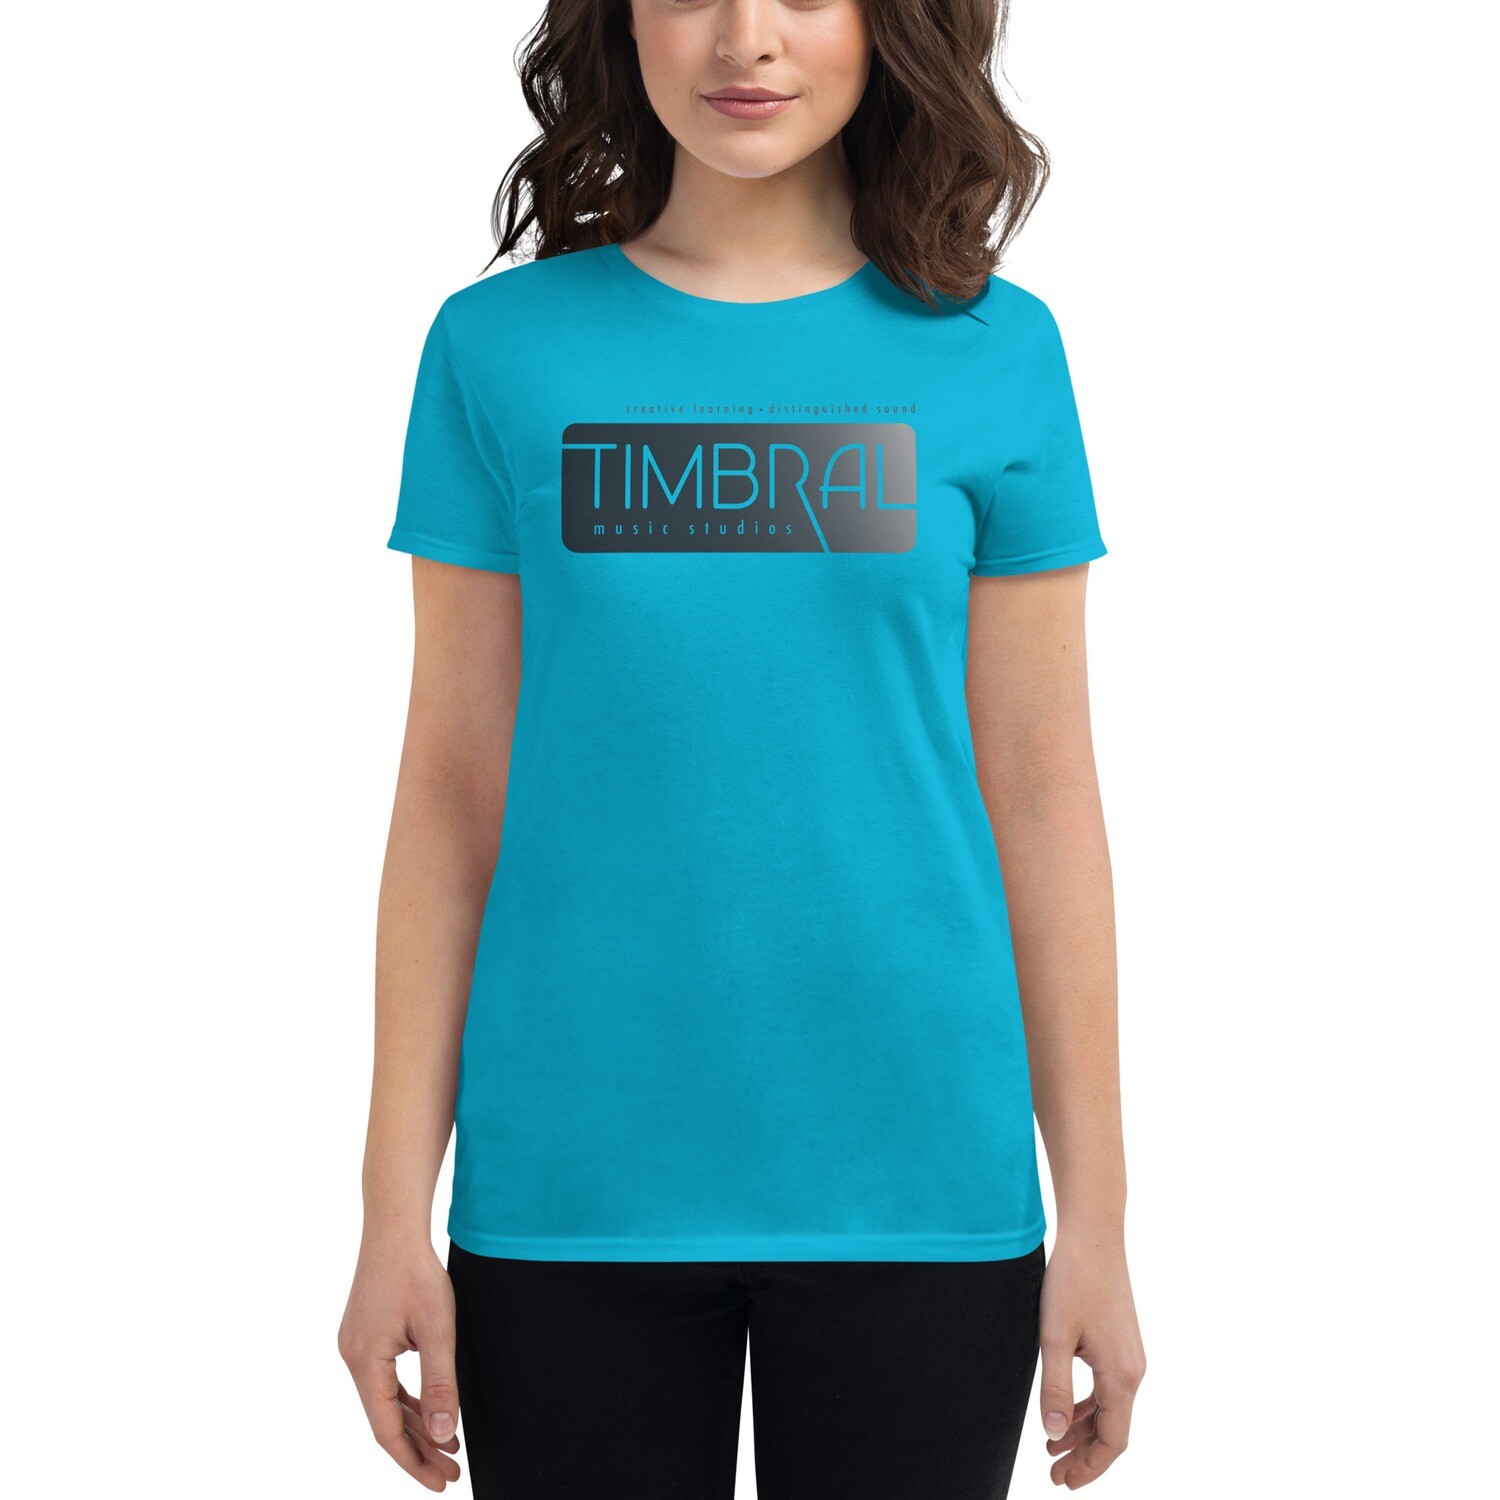 Timbral Women's Fitted T-shirt